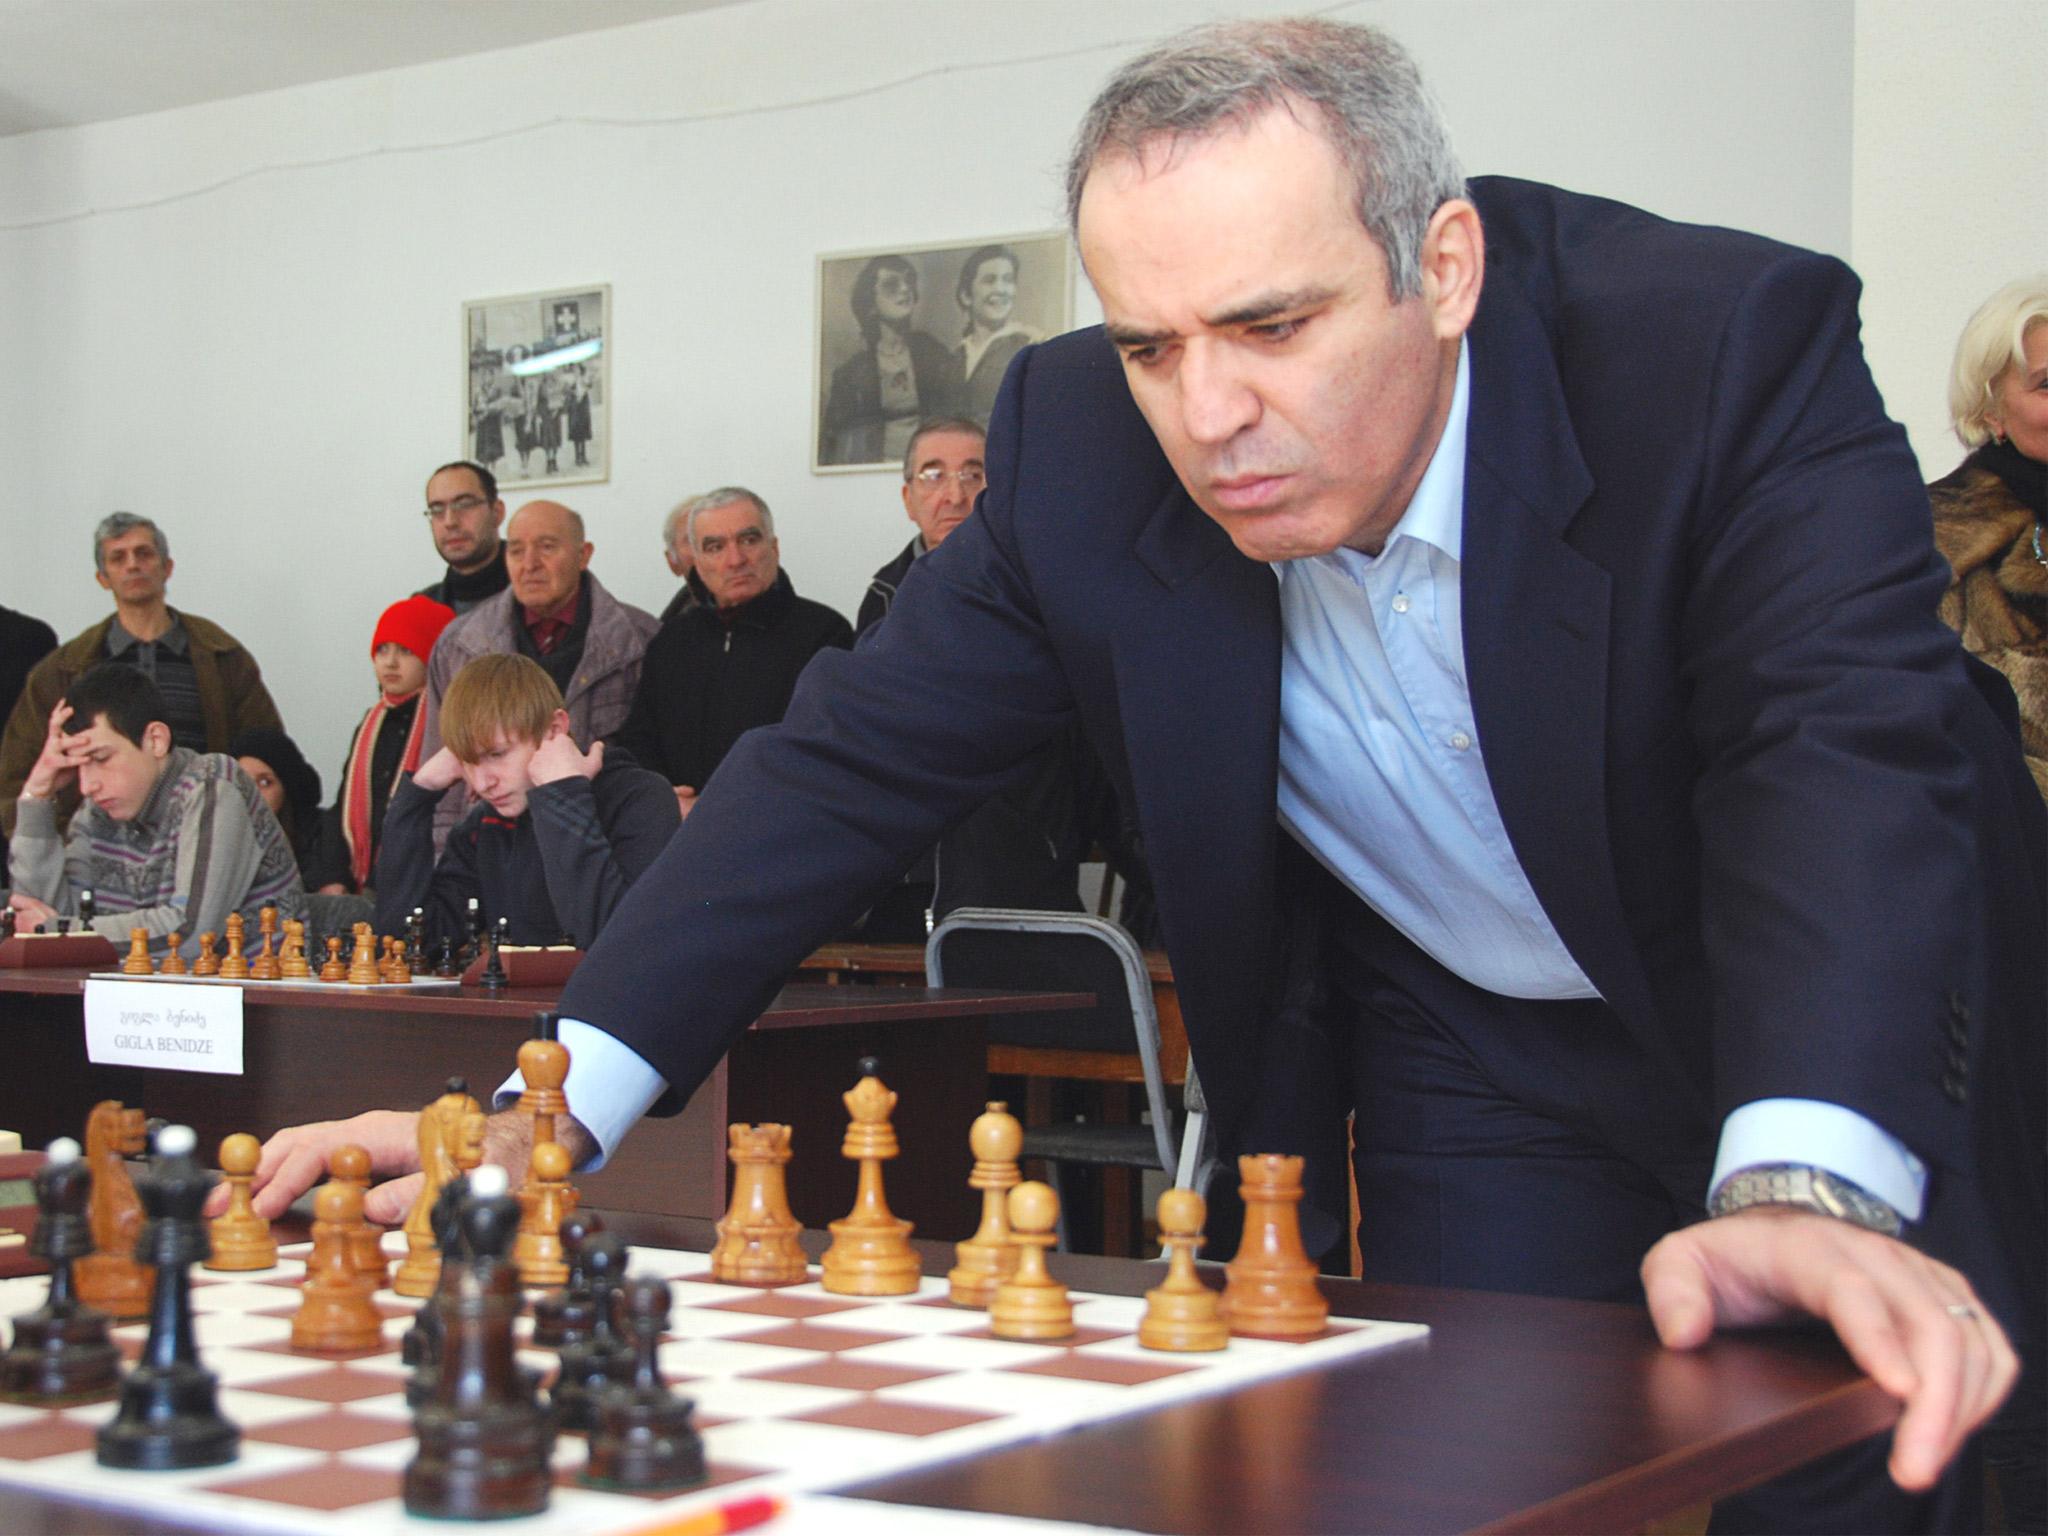 The former World Chess Champion said that Obama should support the Ukrainian people